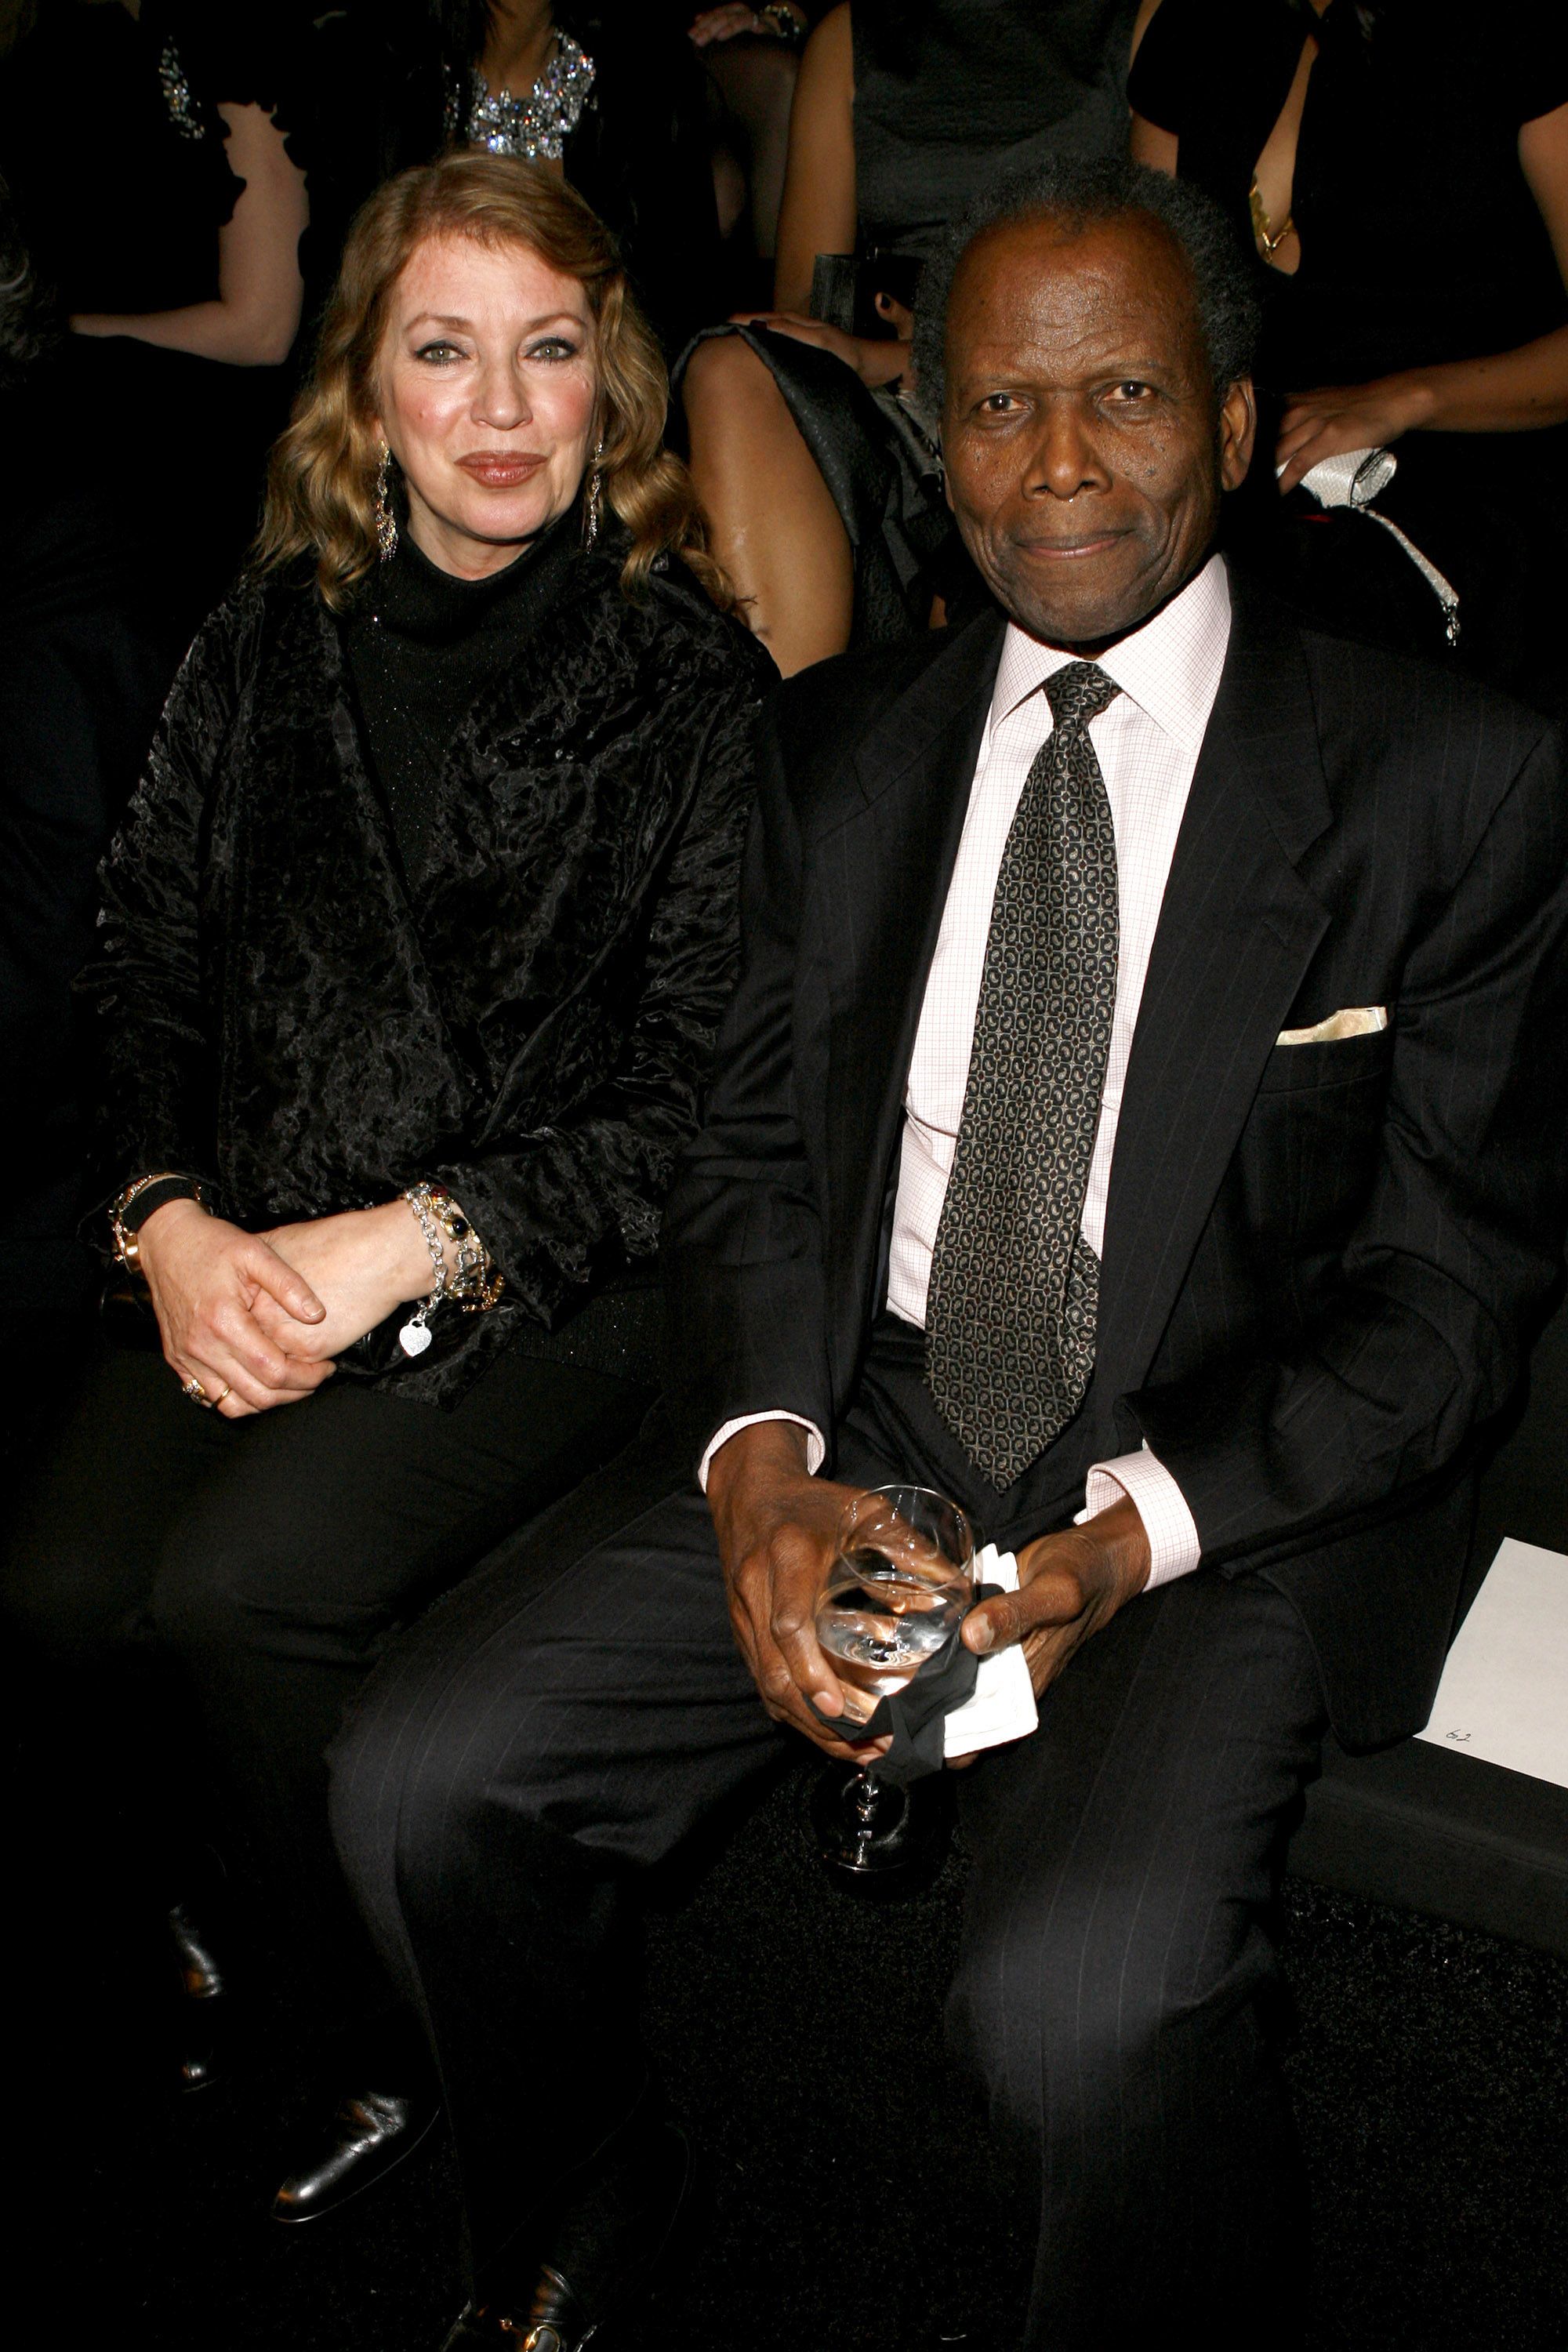 Sidney Poitier and Joanna Shimkus during Giorgio Armani Prive in Los Angeles. | Photo: Getty Images